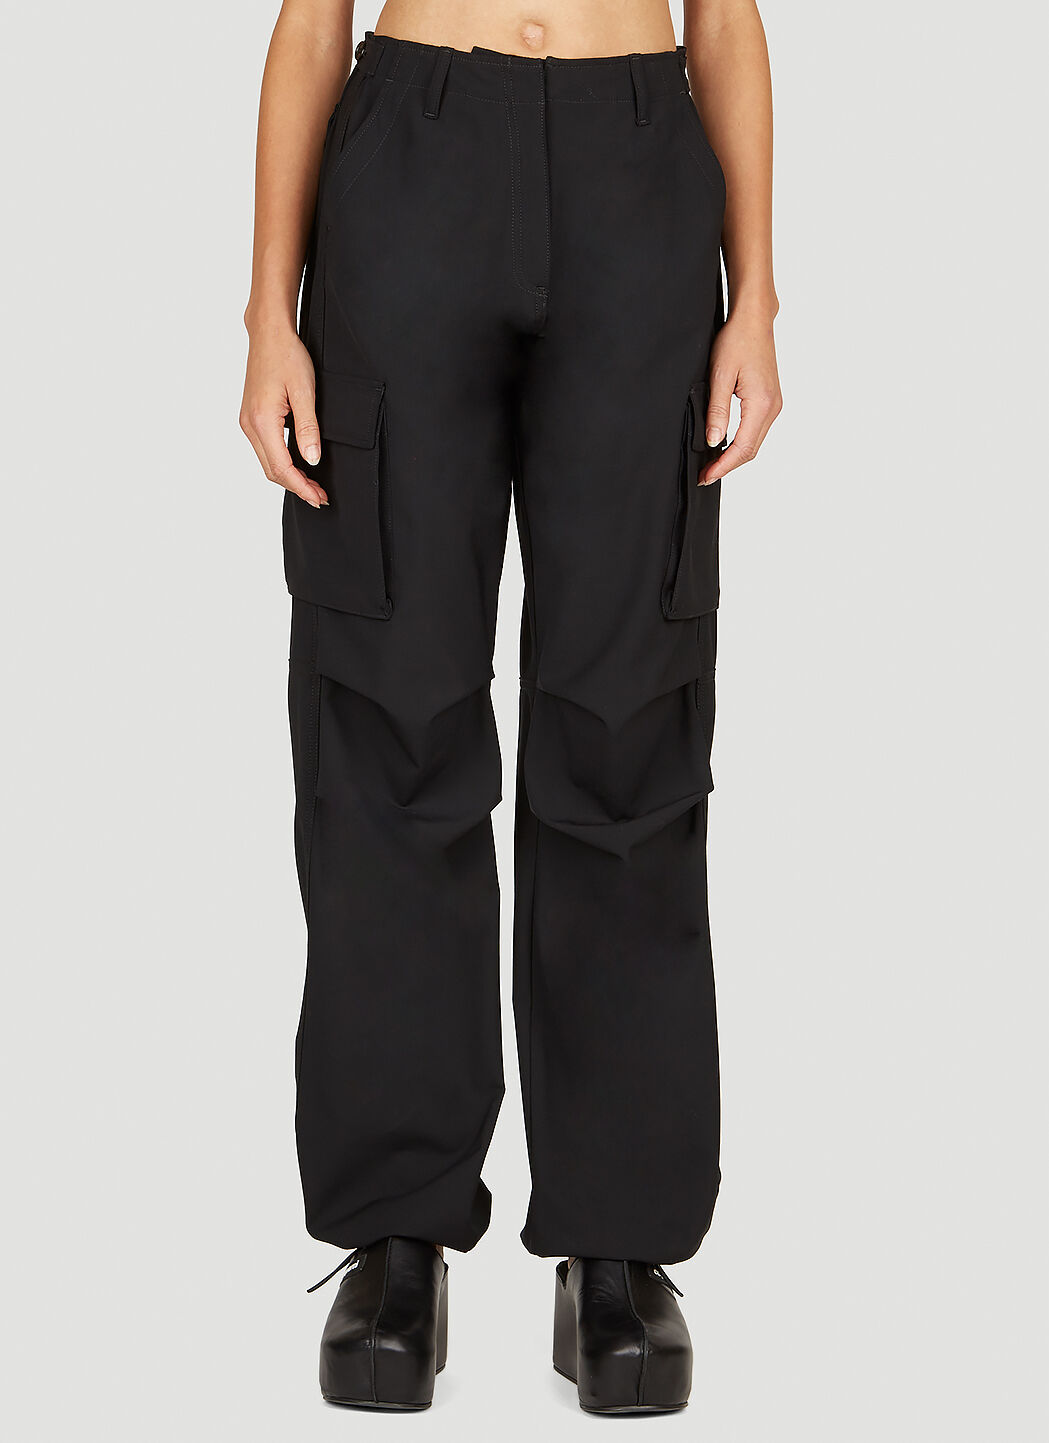 Space Available Tailored Wide Leg Cargo Pants Black spa0354016